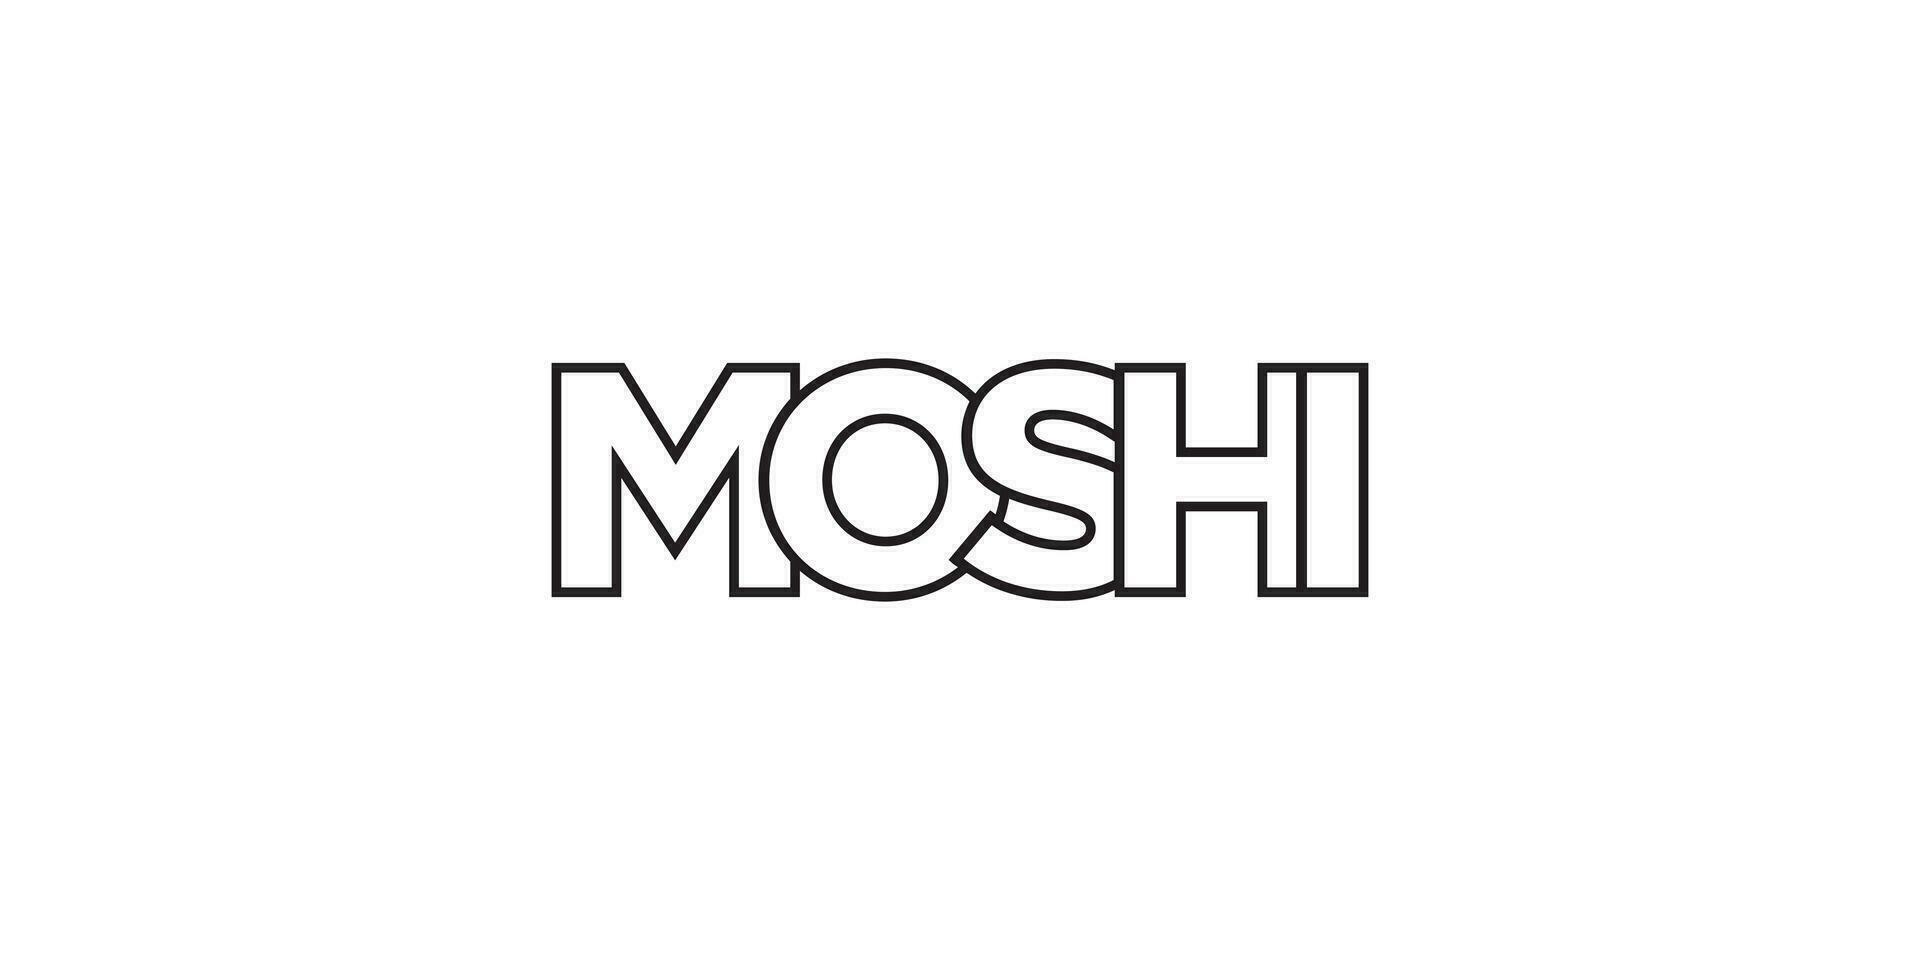 Moshi in the Tanzania emblem. The design features a geometric style, vector illustration with bold typography in a modern font. The graphic slogan lettering.